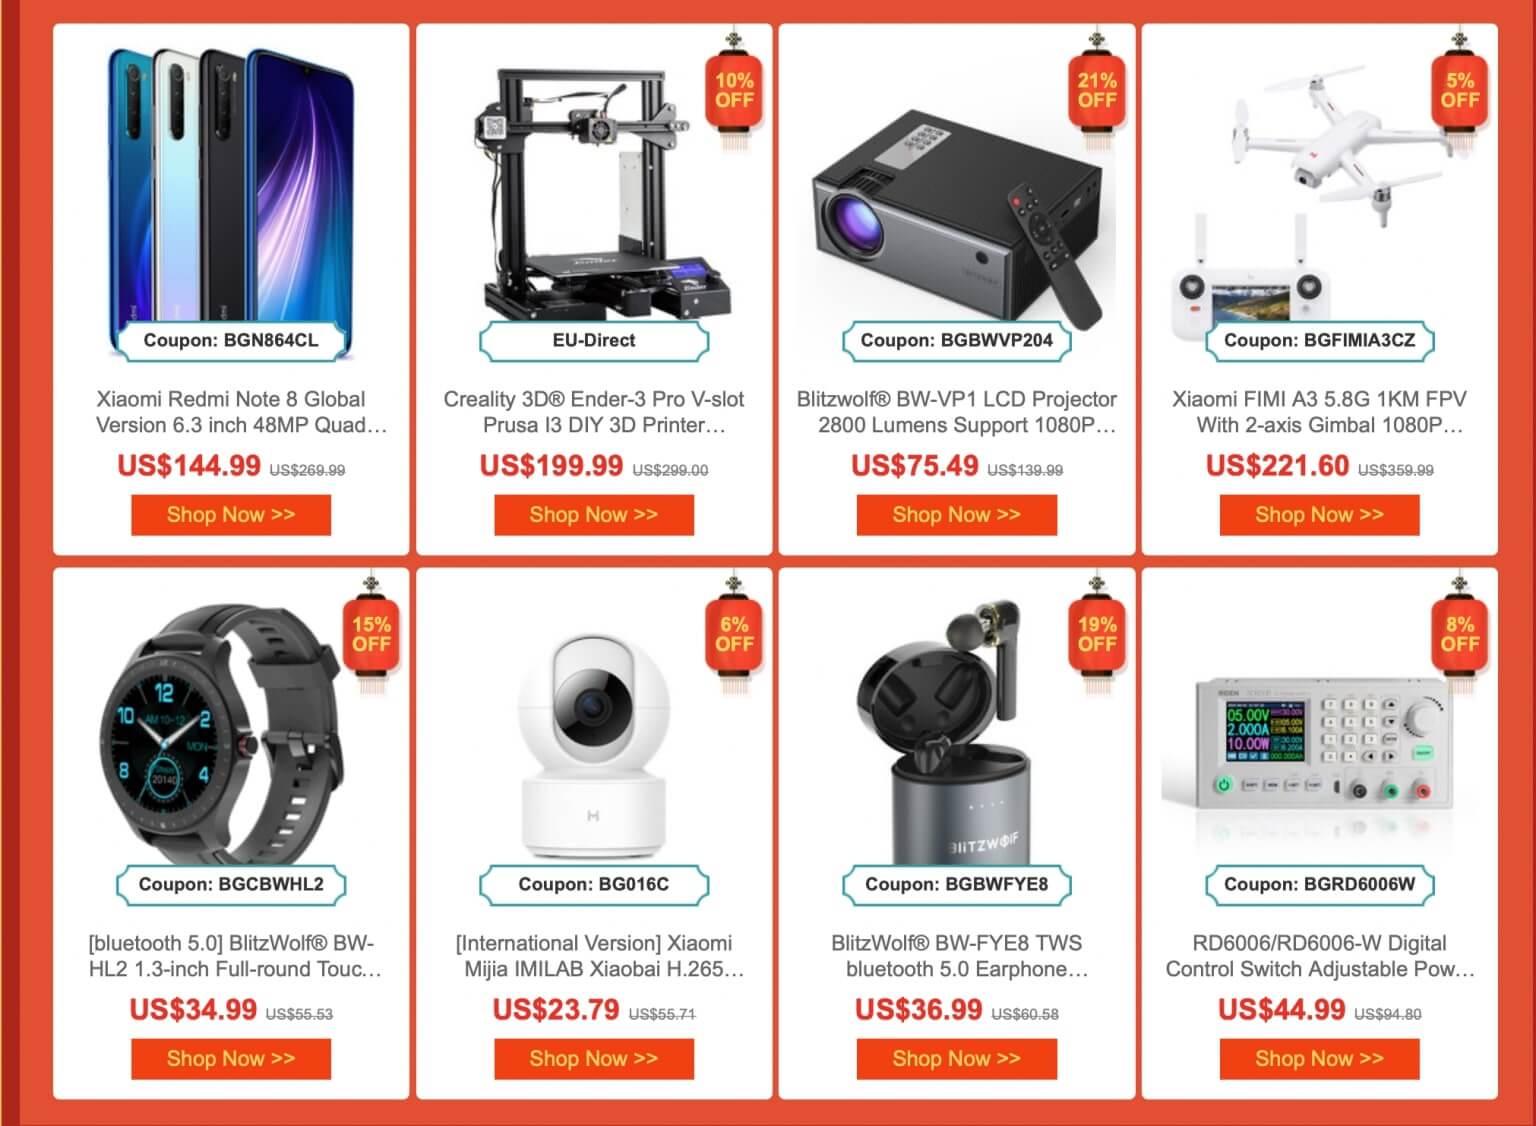 Chinese New Year Festival Deals 2020 